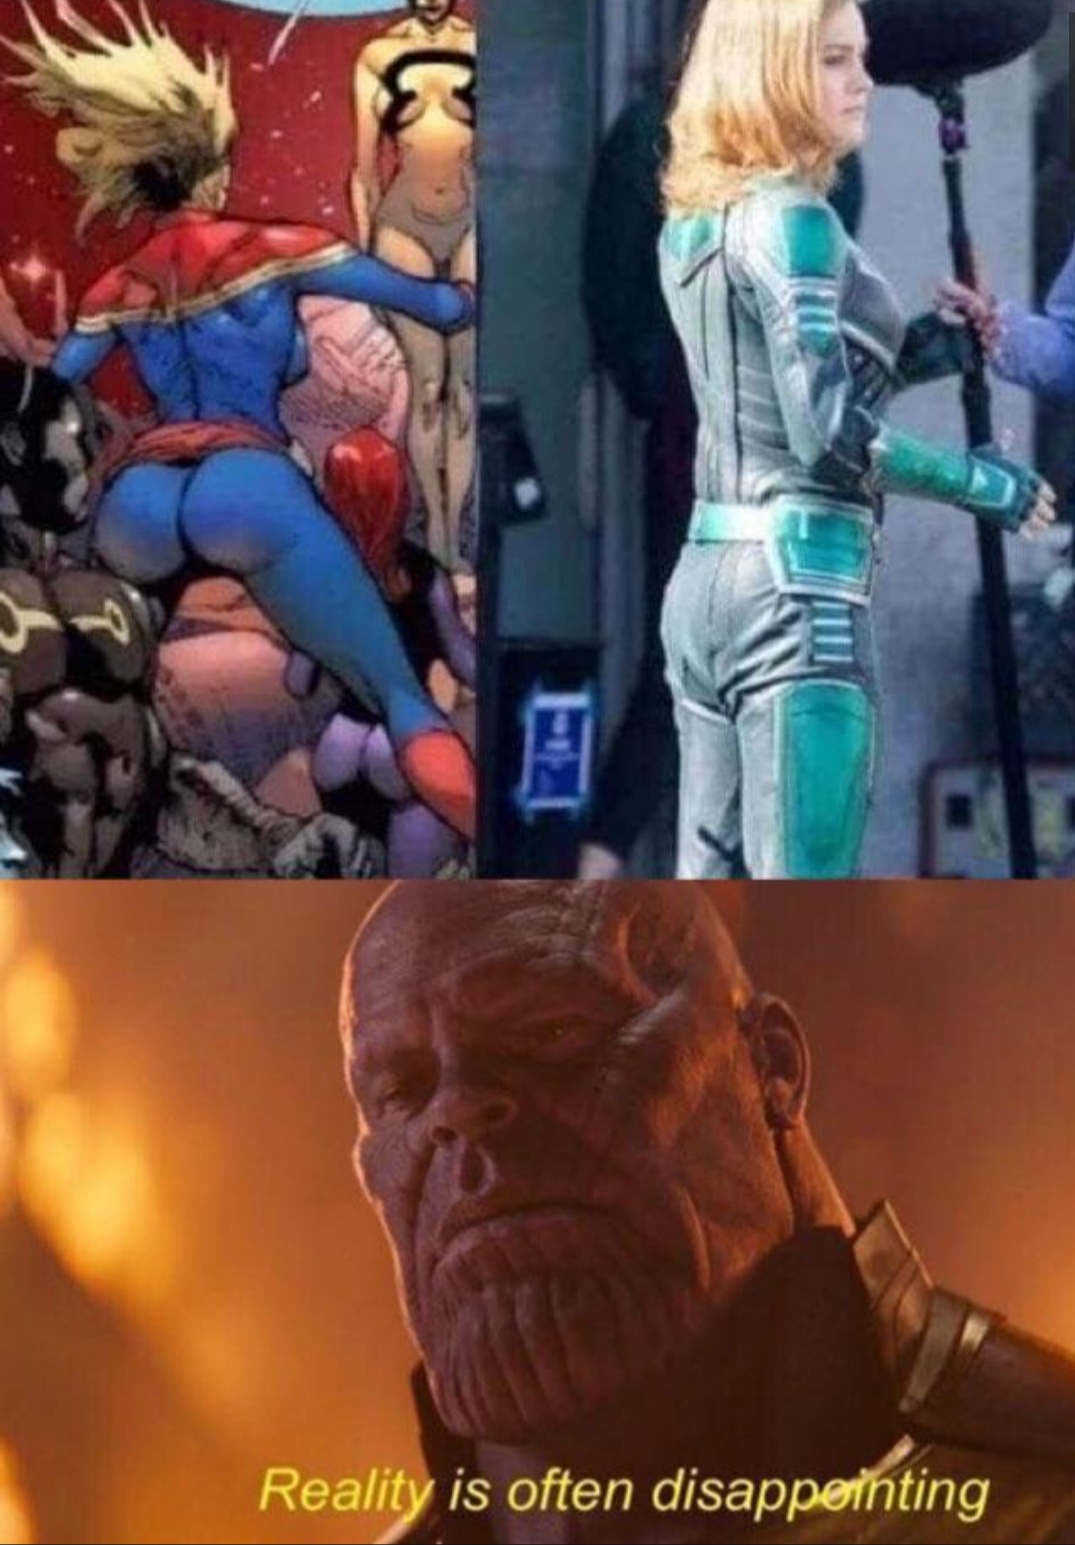 reality is often disappointing captain marvel - Reality is often disappointing